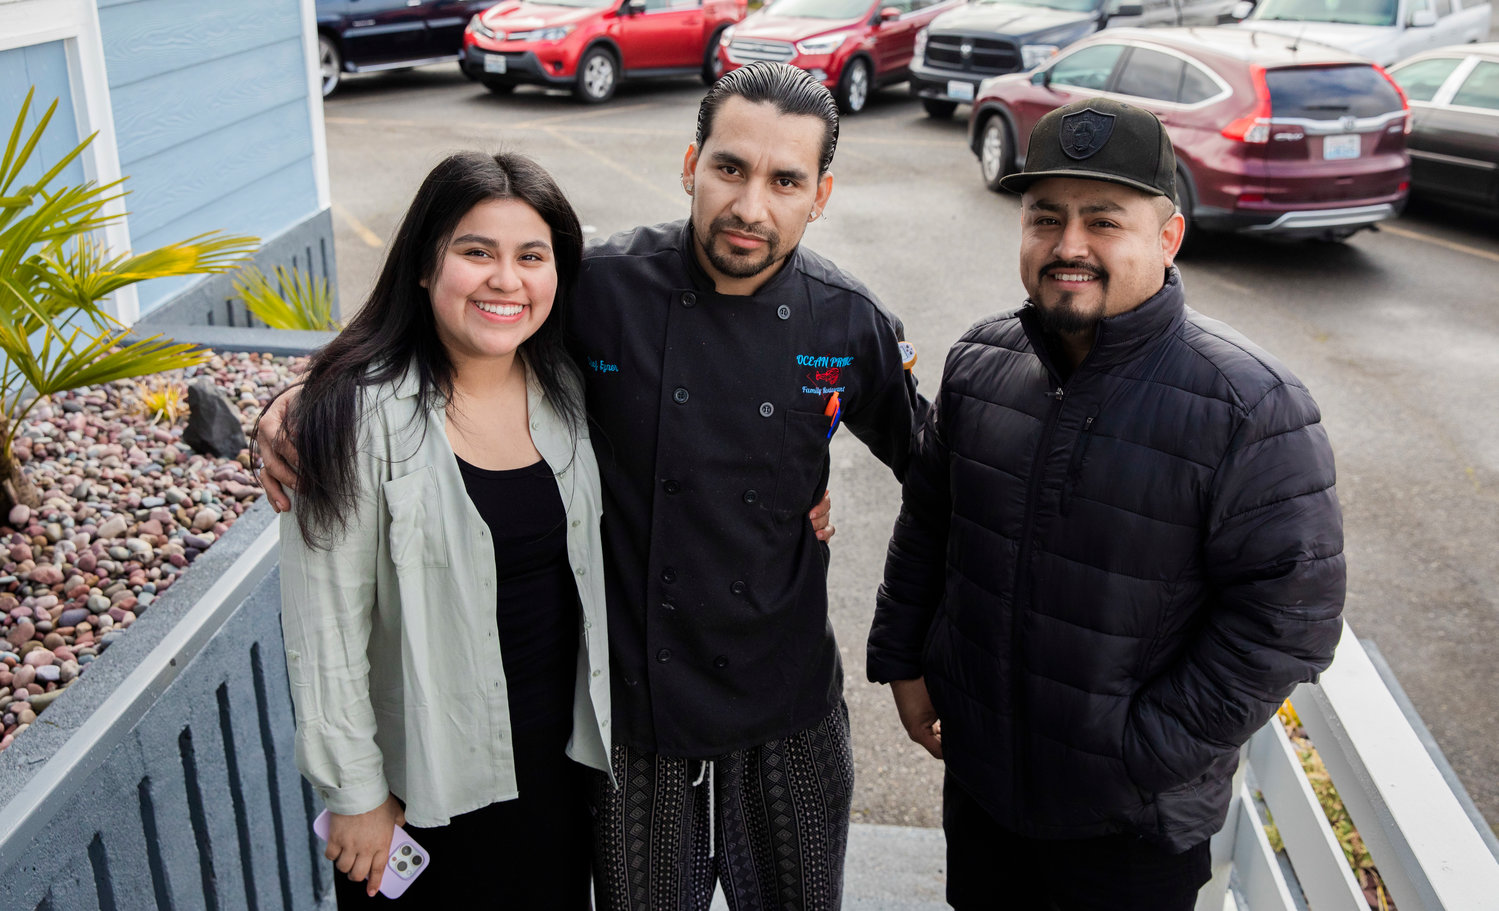 Chef Eyner "Rene" Cardona poses for a photo with attendees at a grand opening ceremony Monday morning outside Ocean Prime Family Restaurant in Chehalis.